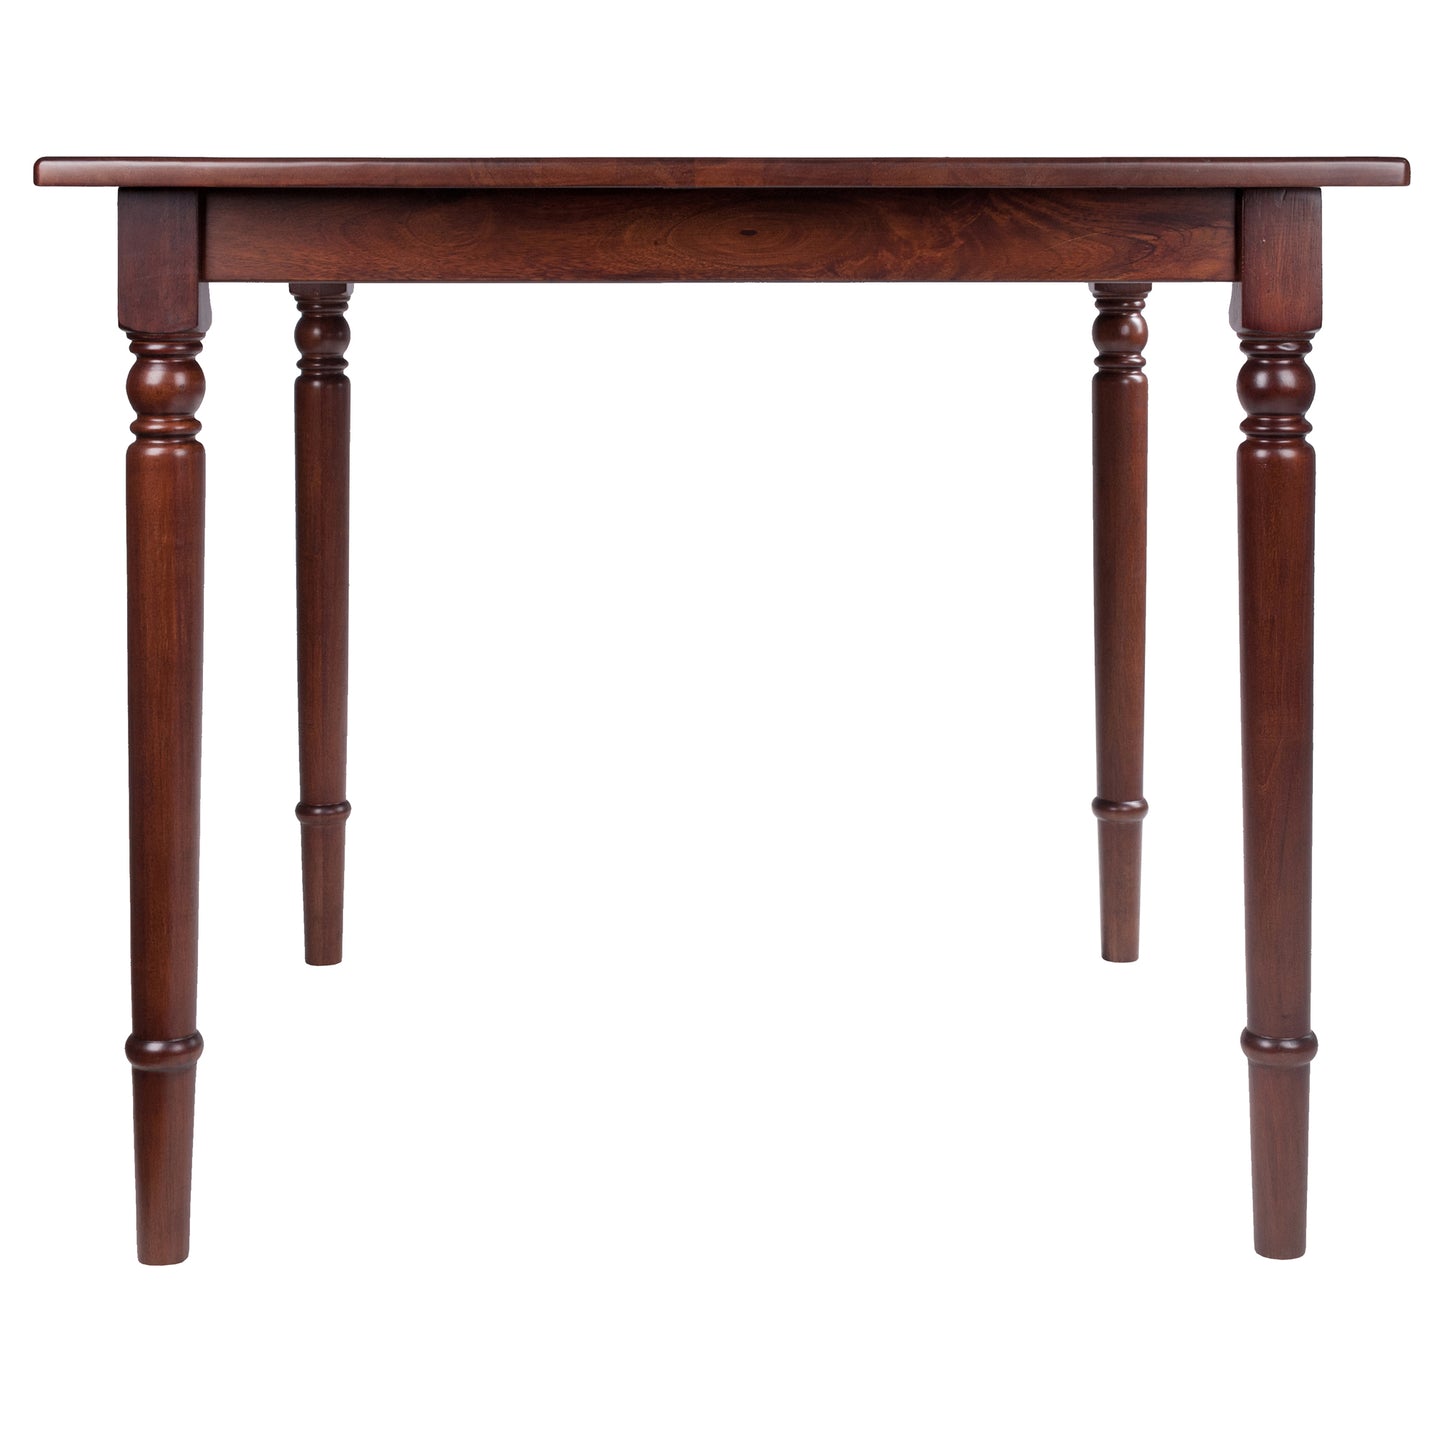 Mornay Square Dining Table, Walnut